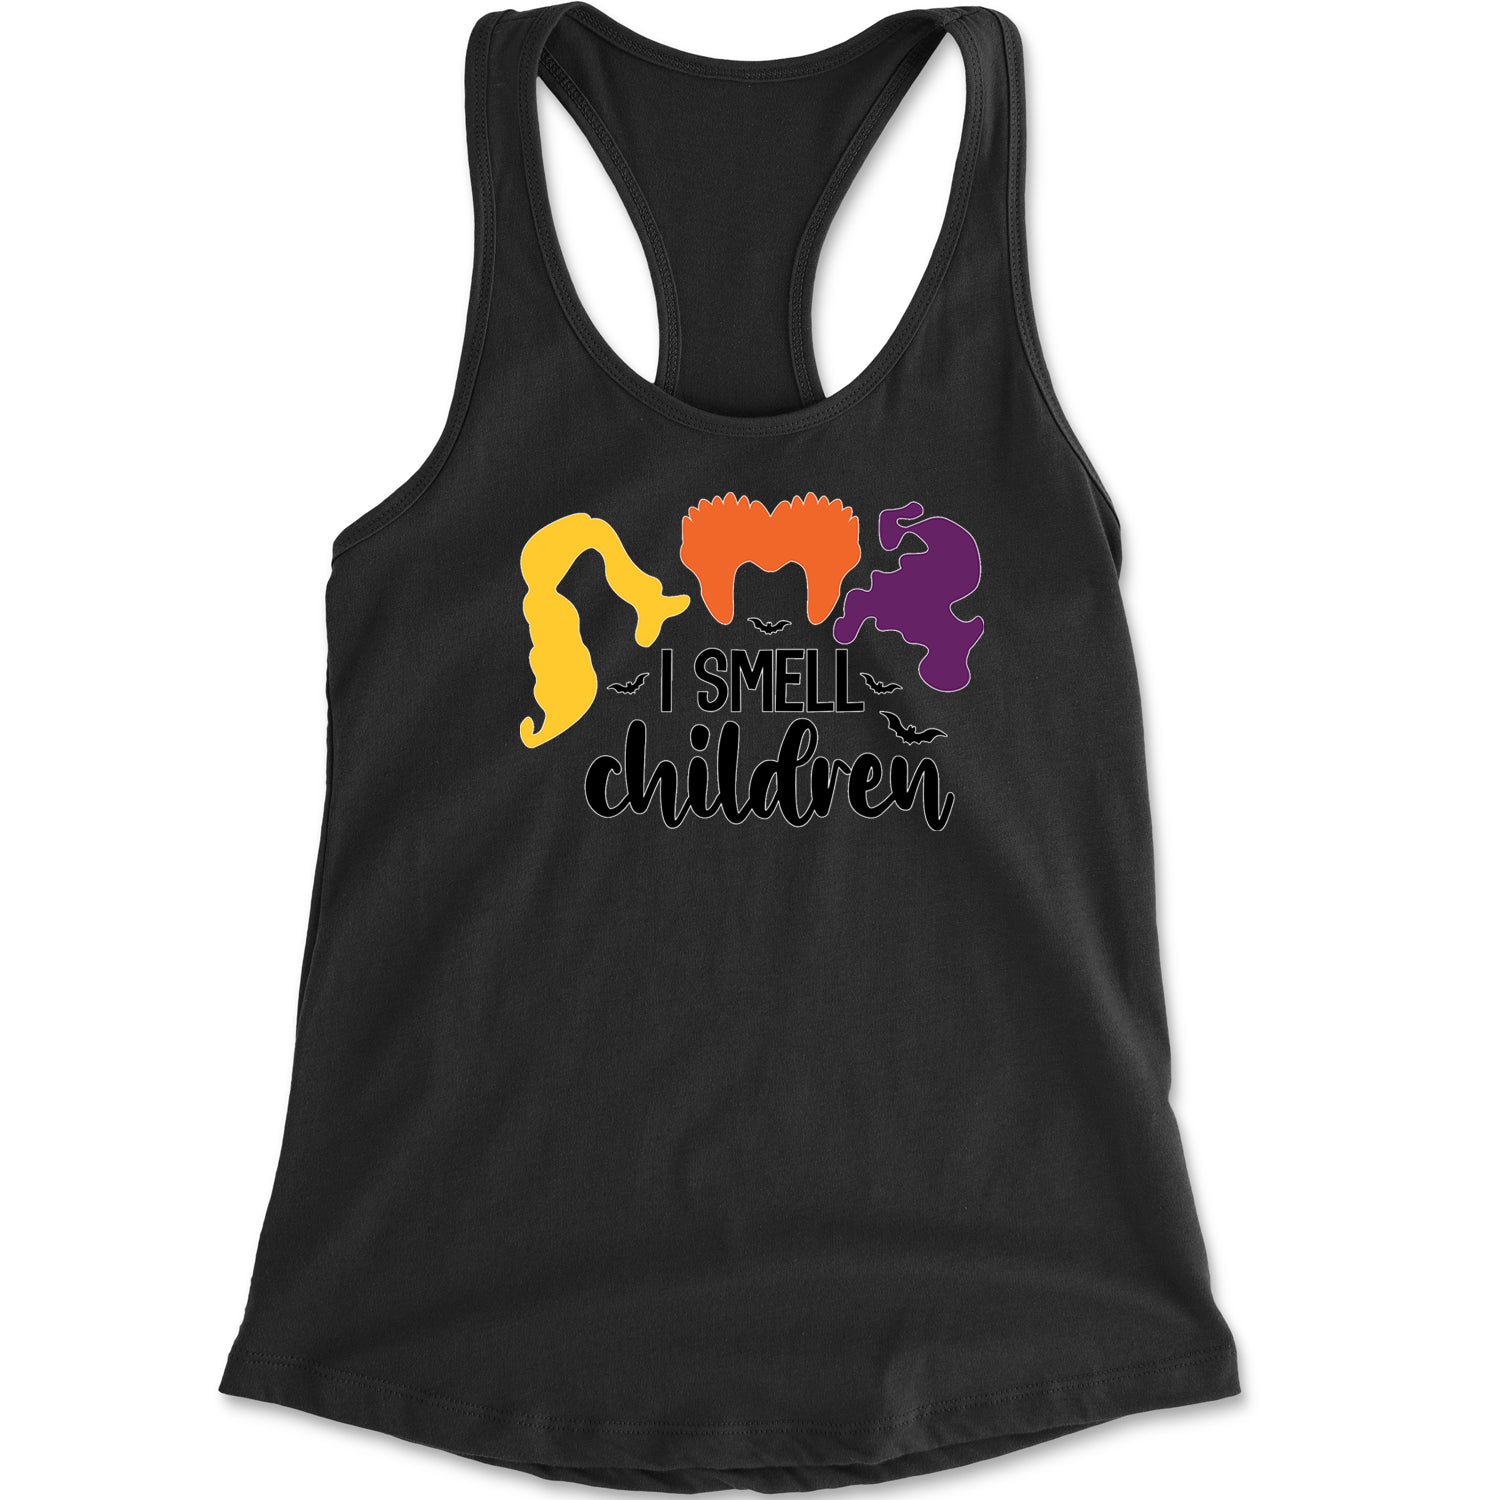 I Smell Children Hocus Pocus Racerback Tank Top for Women descendants, enchanted, eve, hallows, hocus, or, pocus, sanderson, sisters, treat, trick, witches by Expression Tees